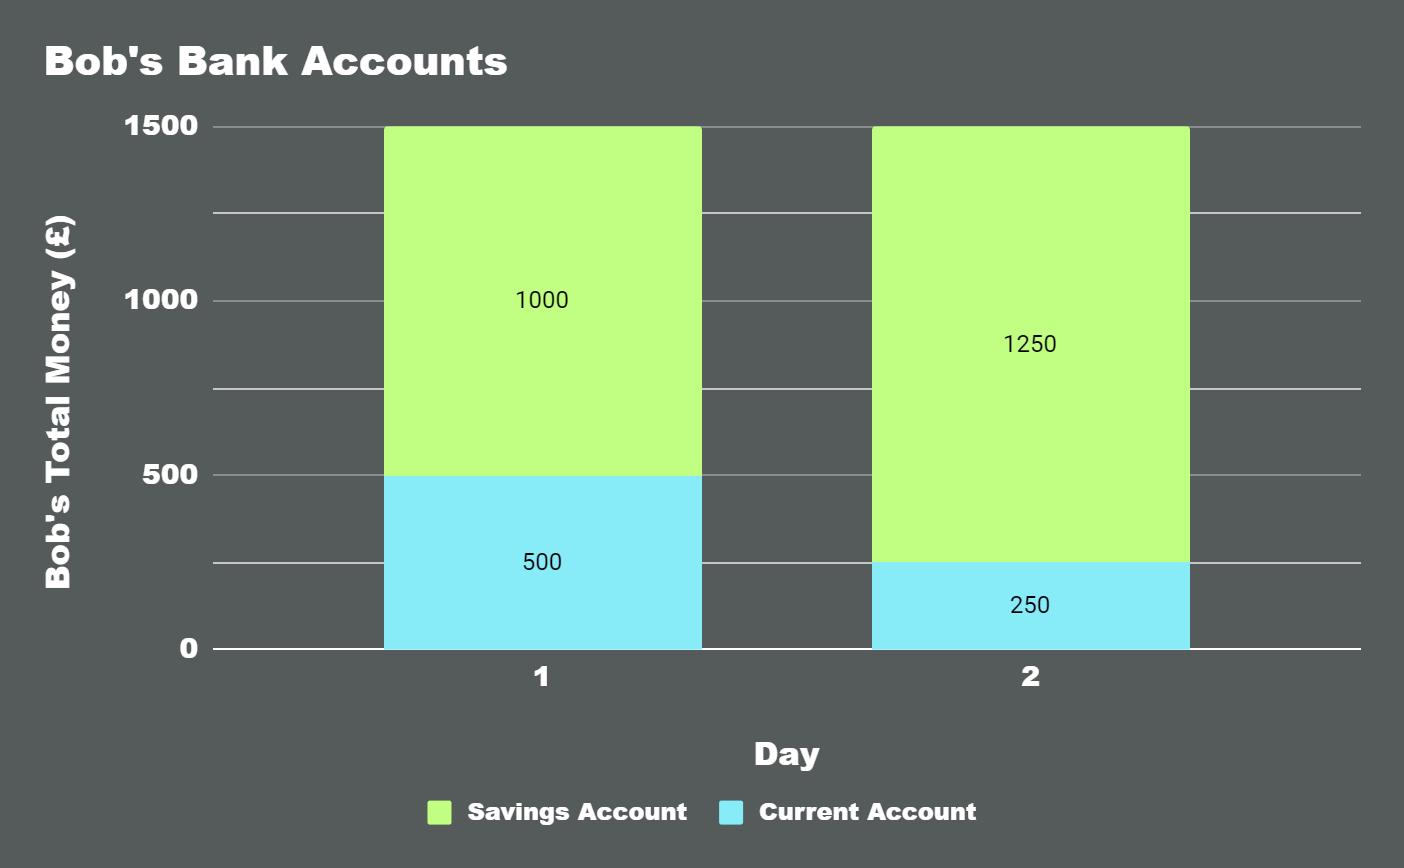 Comparison of Bob's savings account to his current account across a two day period.